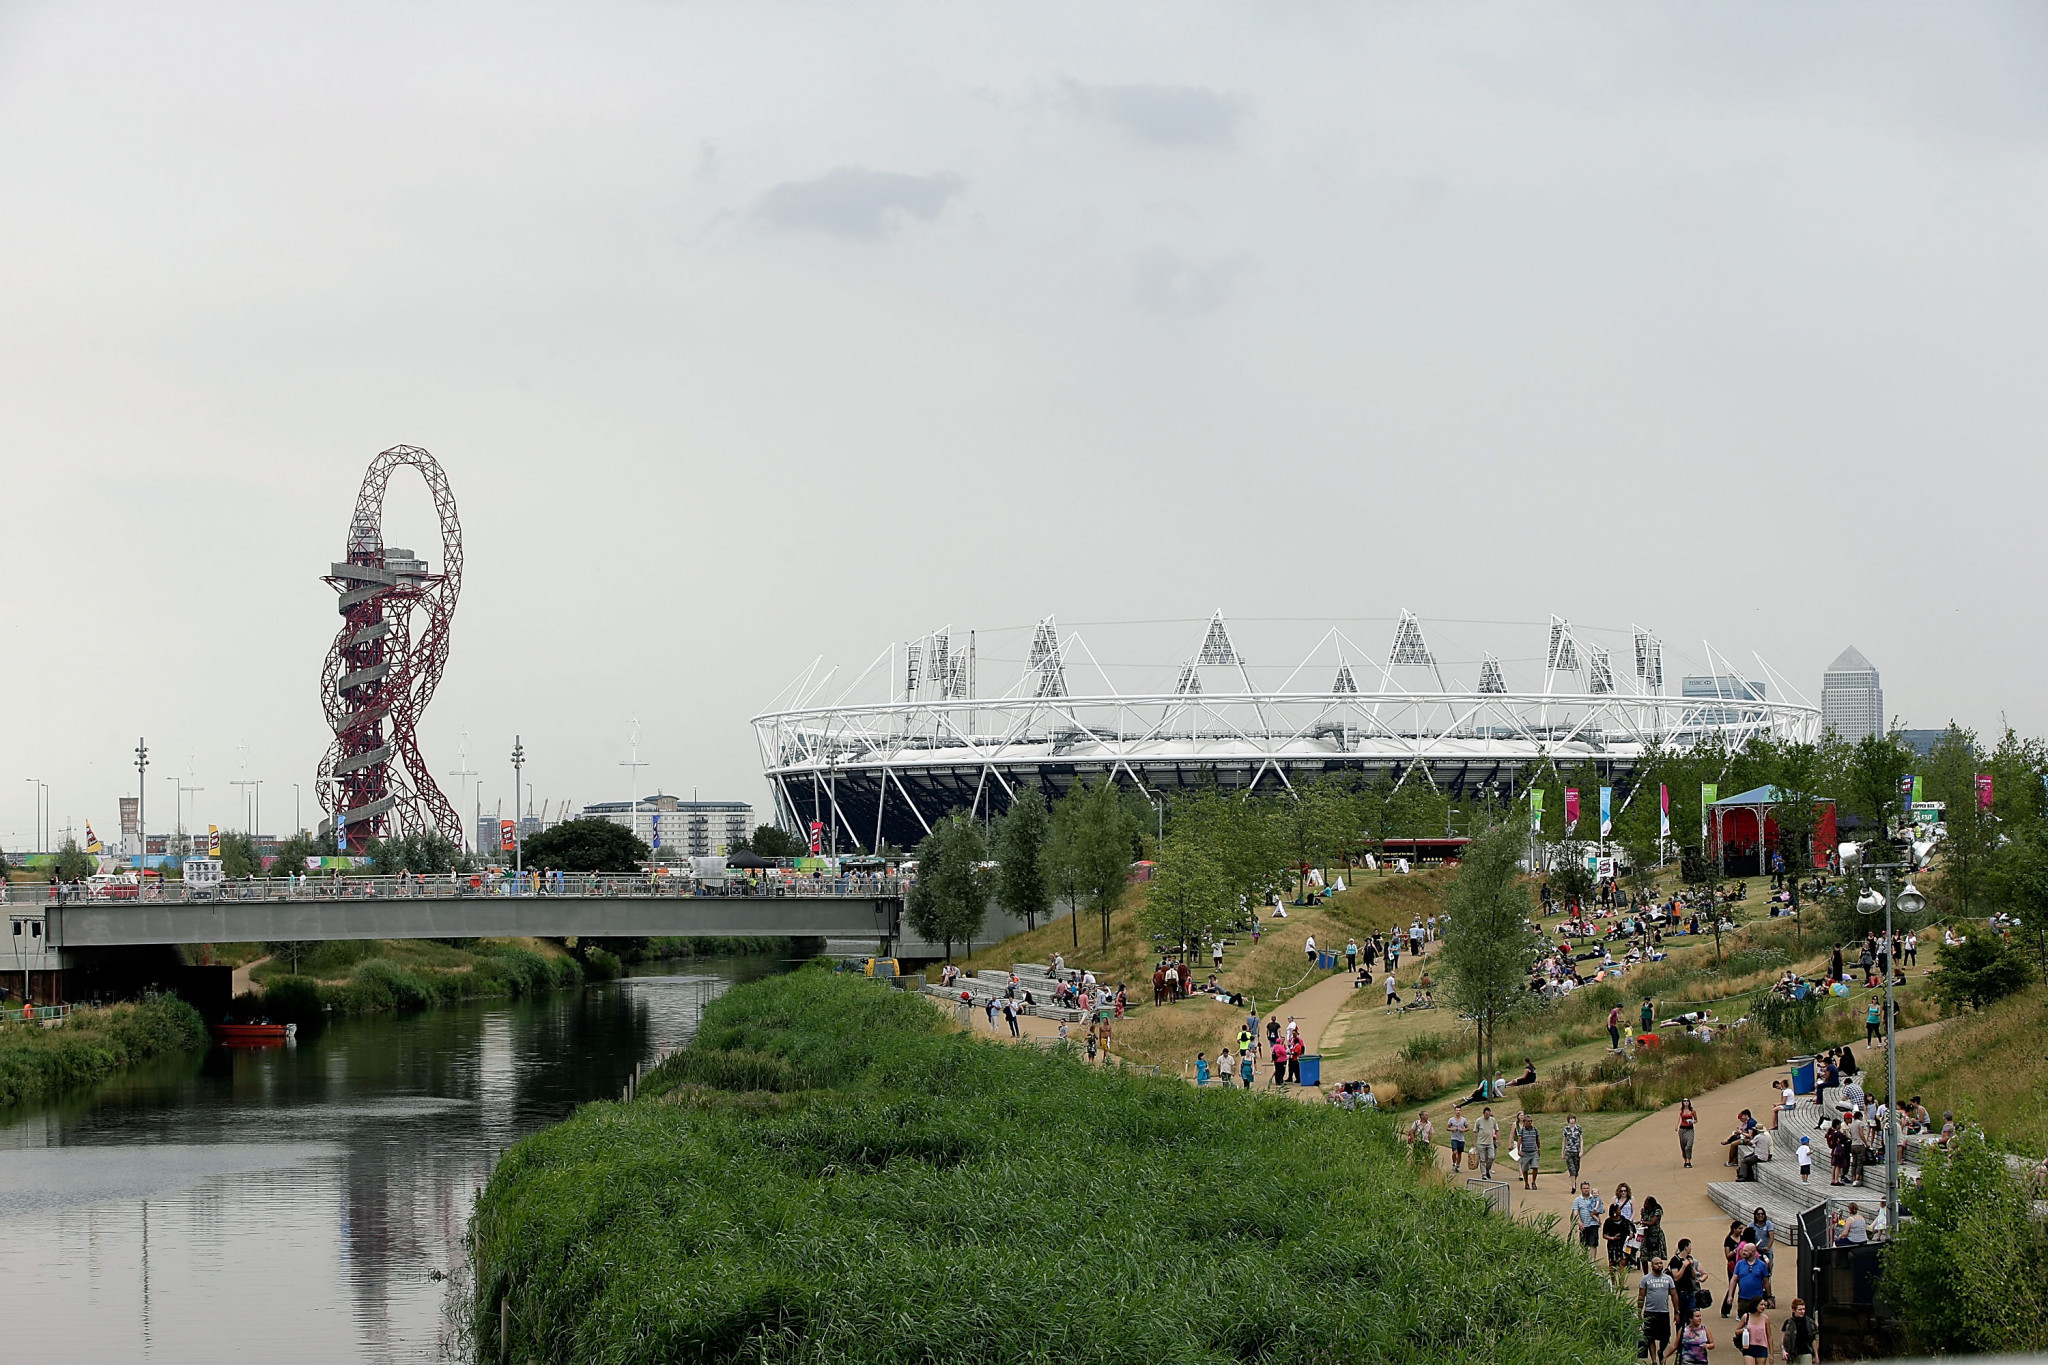 The 1,800 new houses are due to be built on the west side of the Queen Elizabeth Olympic Park, the site which hosted the London 2012 Olympic Games ©Getty Images